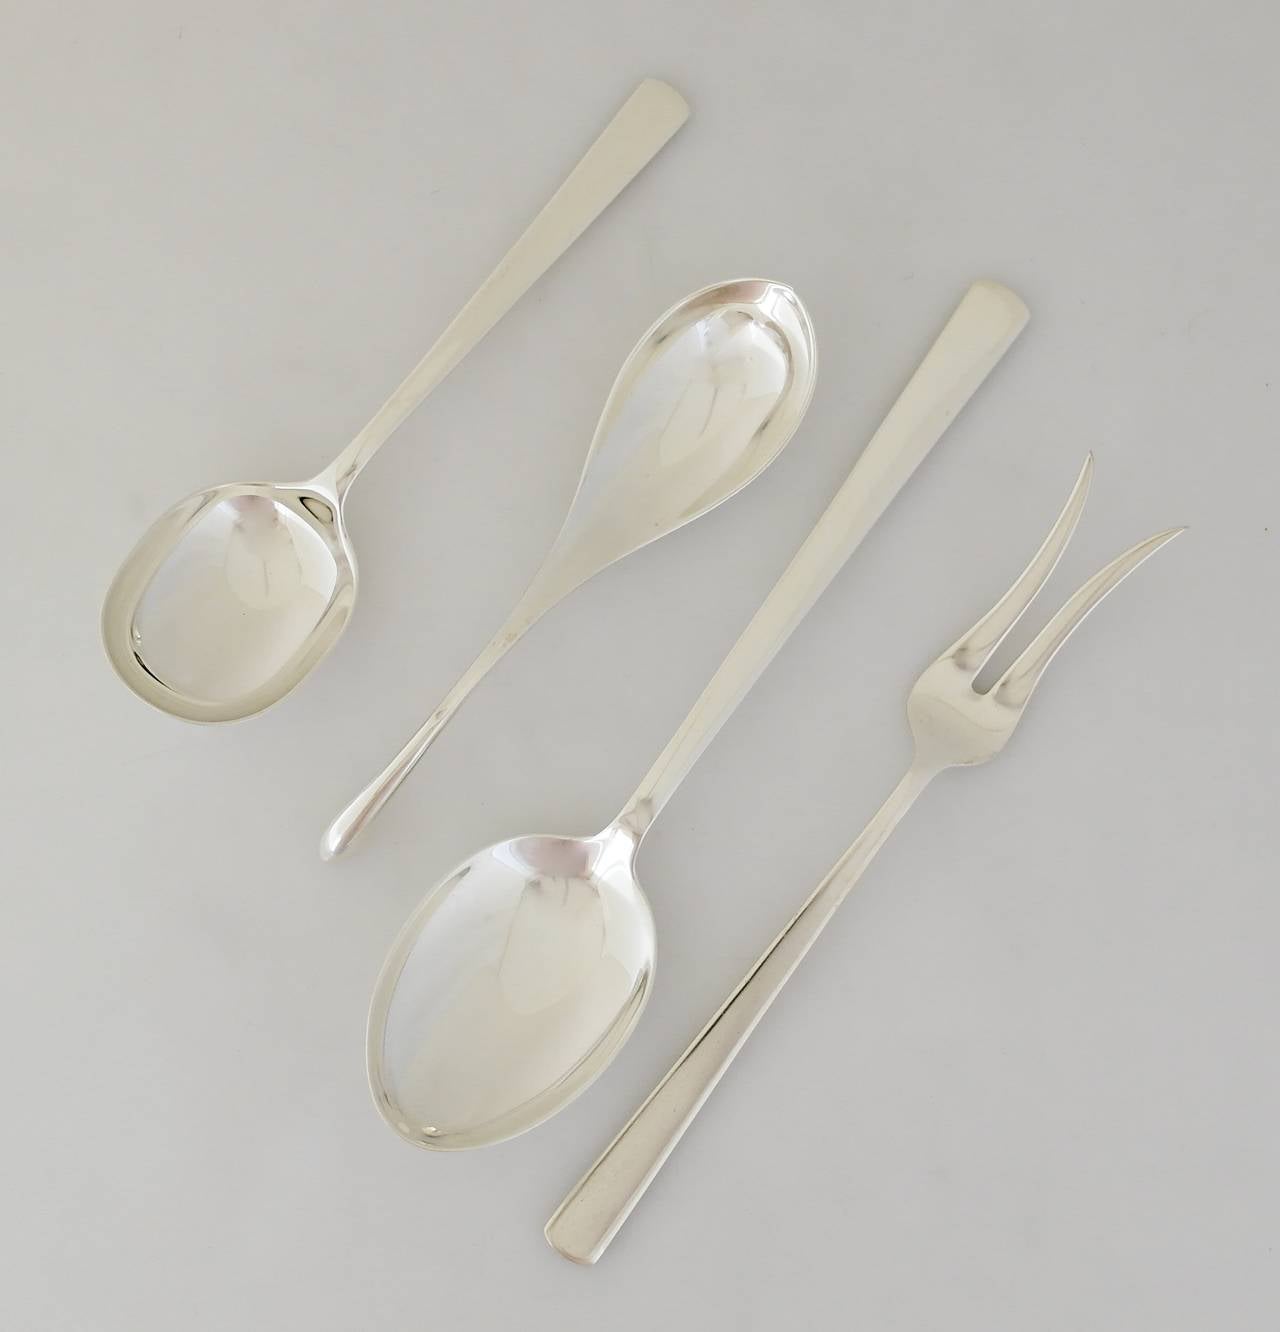 Being offered is a sterling silver flatware set by Codan of Mexico. Codan is known for their Danish modernist designs. This incredible 52 piece set consists of the following:
Eight teaspoons (5 3/4